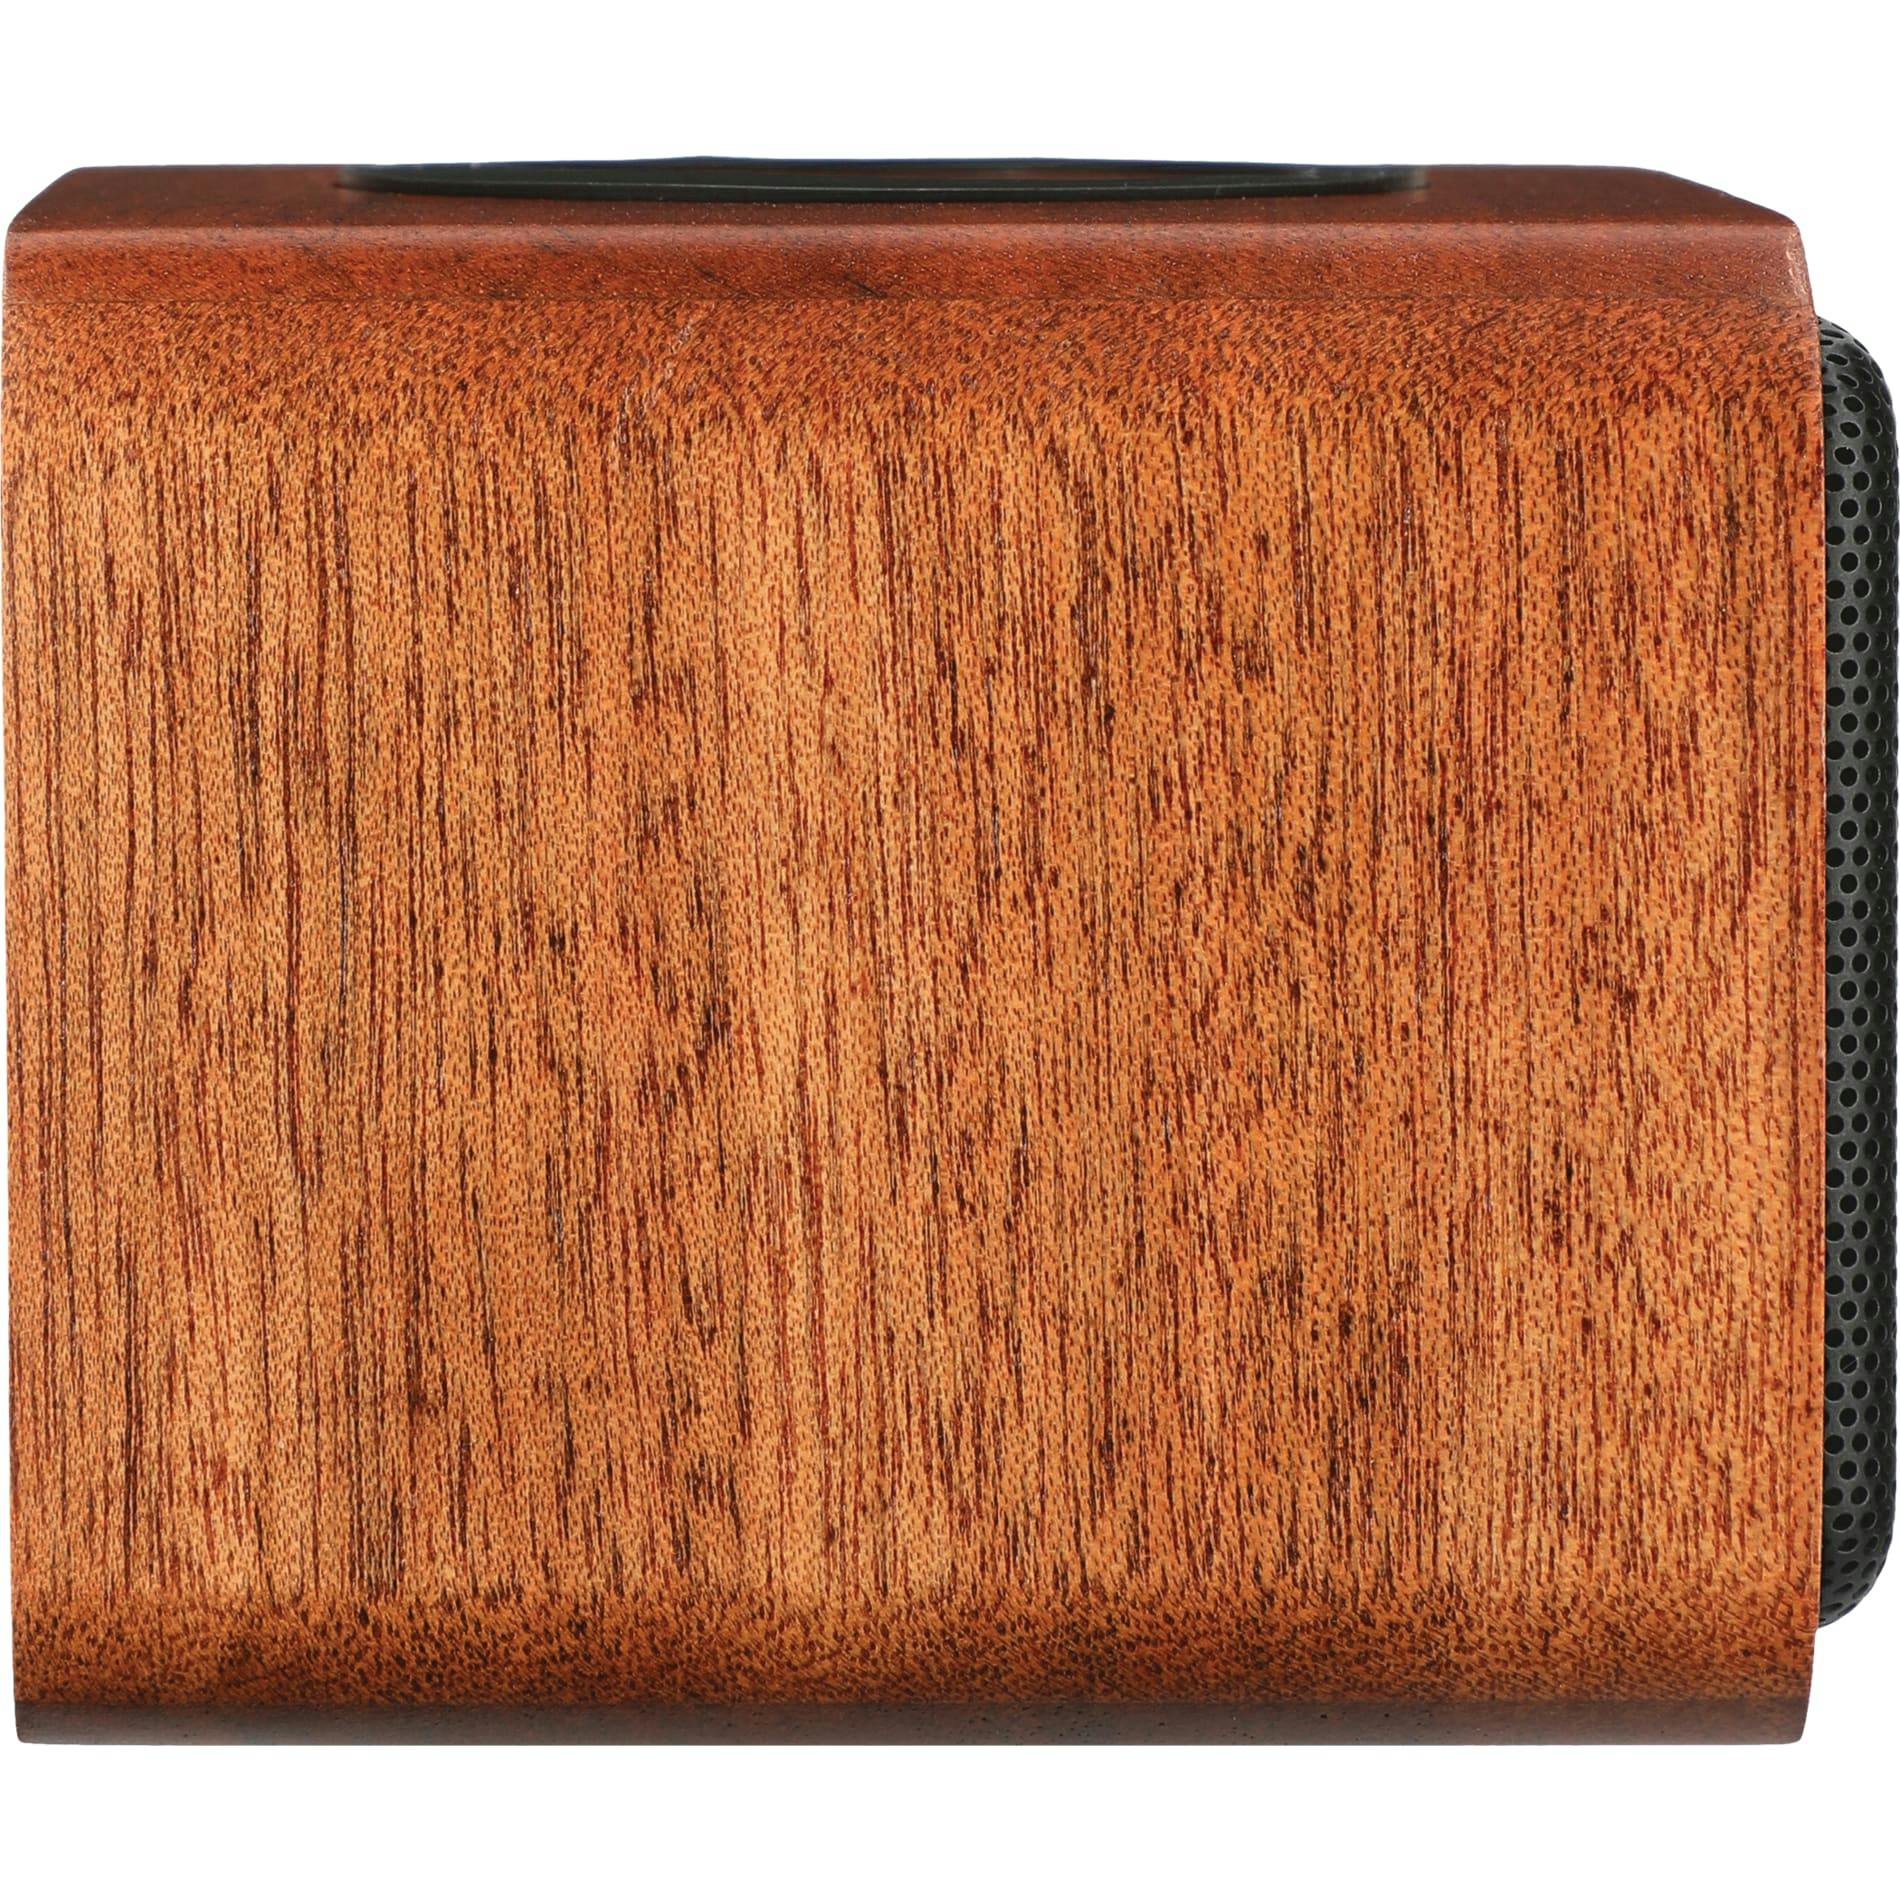 Wood Bluetooth Speaker with Wireless Charging Pad - additional Image 3